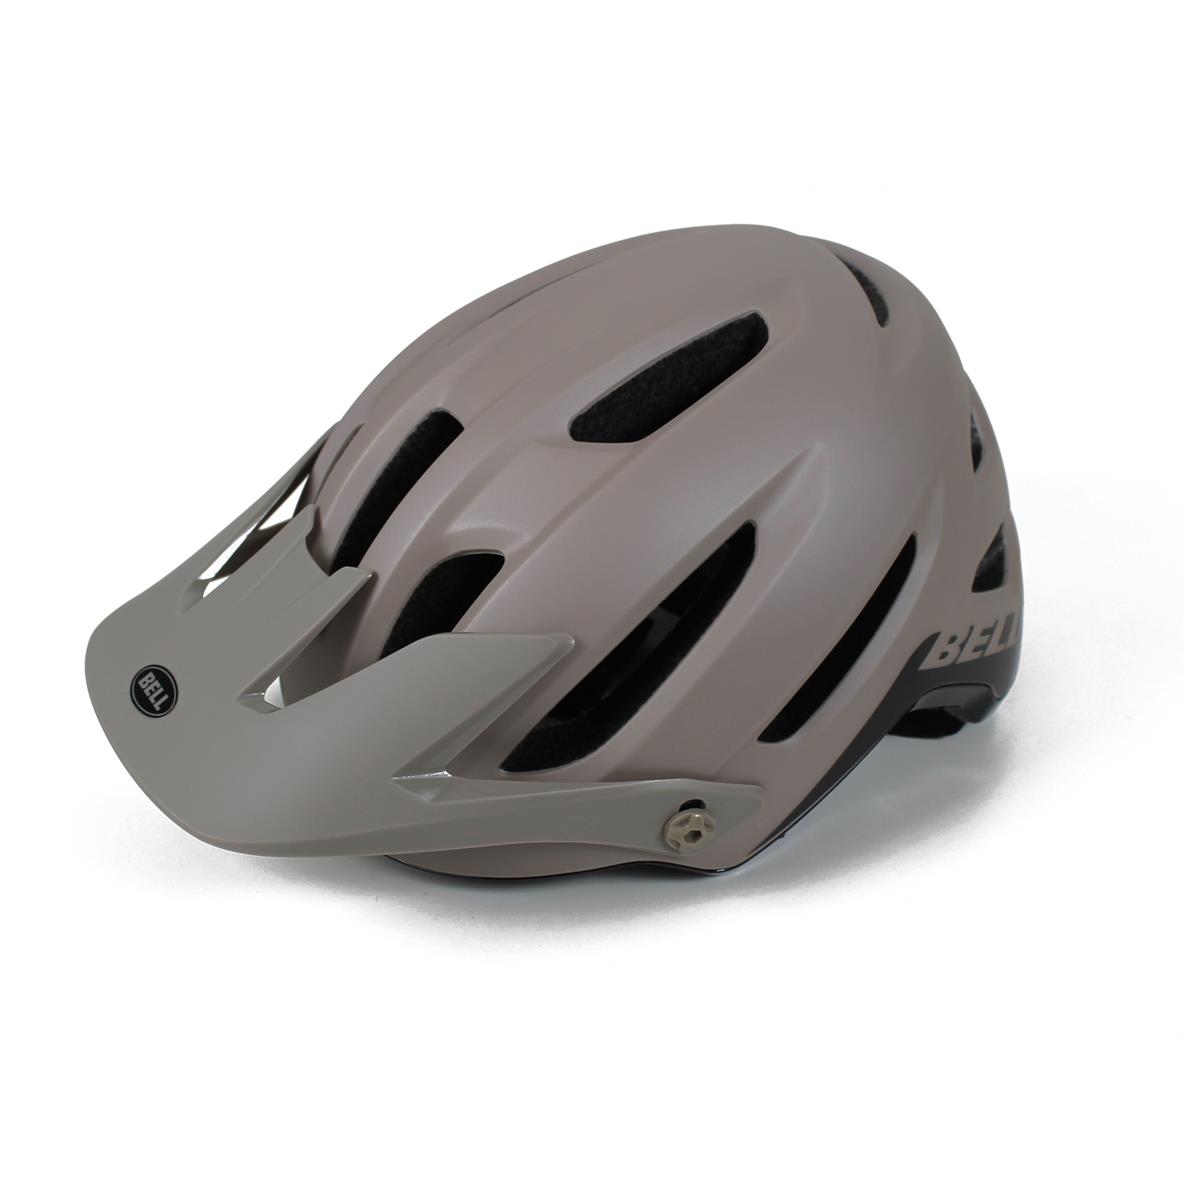 Capacete 4FORTY MIPS tamanho S (52-56cm)